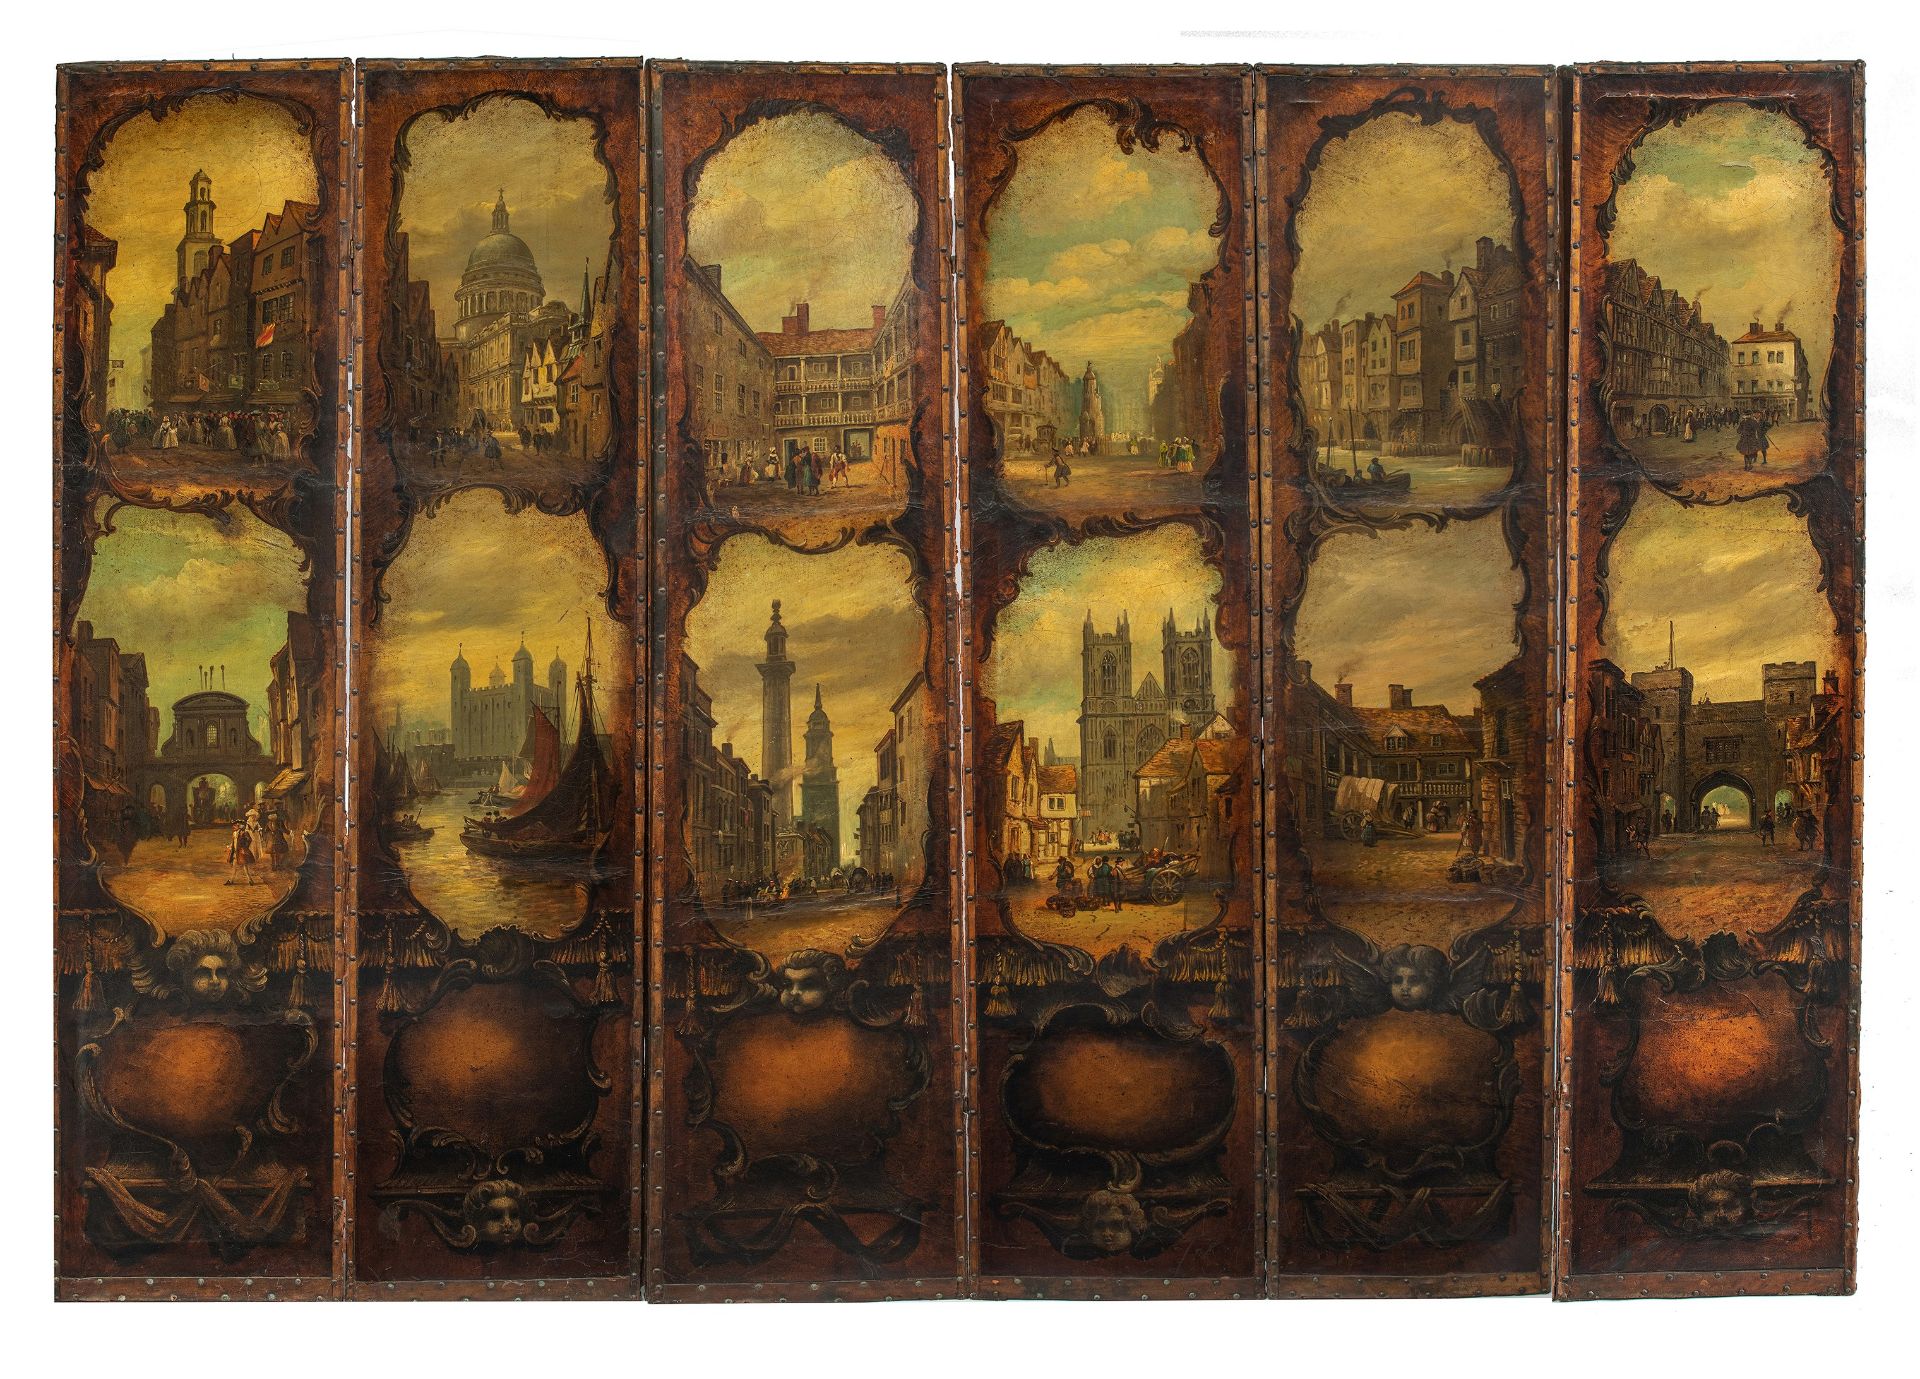 A six-panel screen depicting famous views of London, H 184 - W 6 x 41 cm